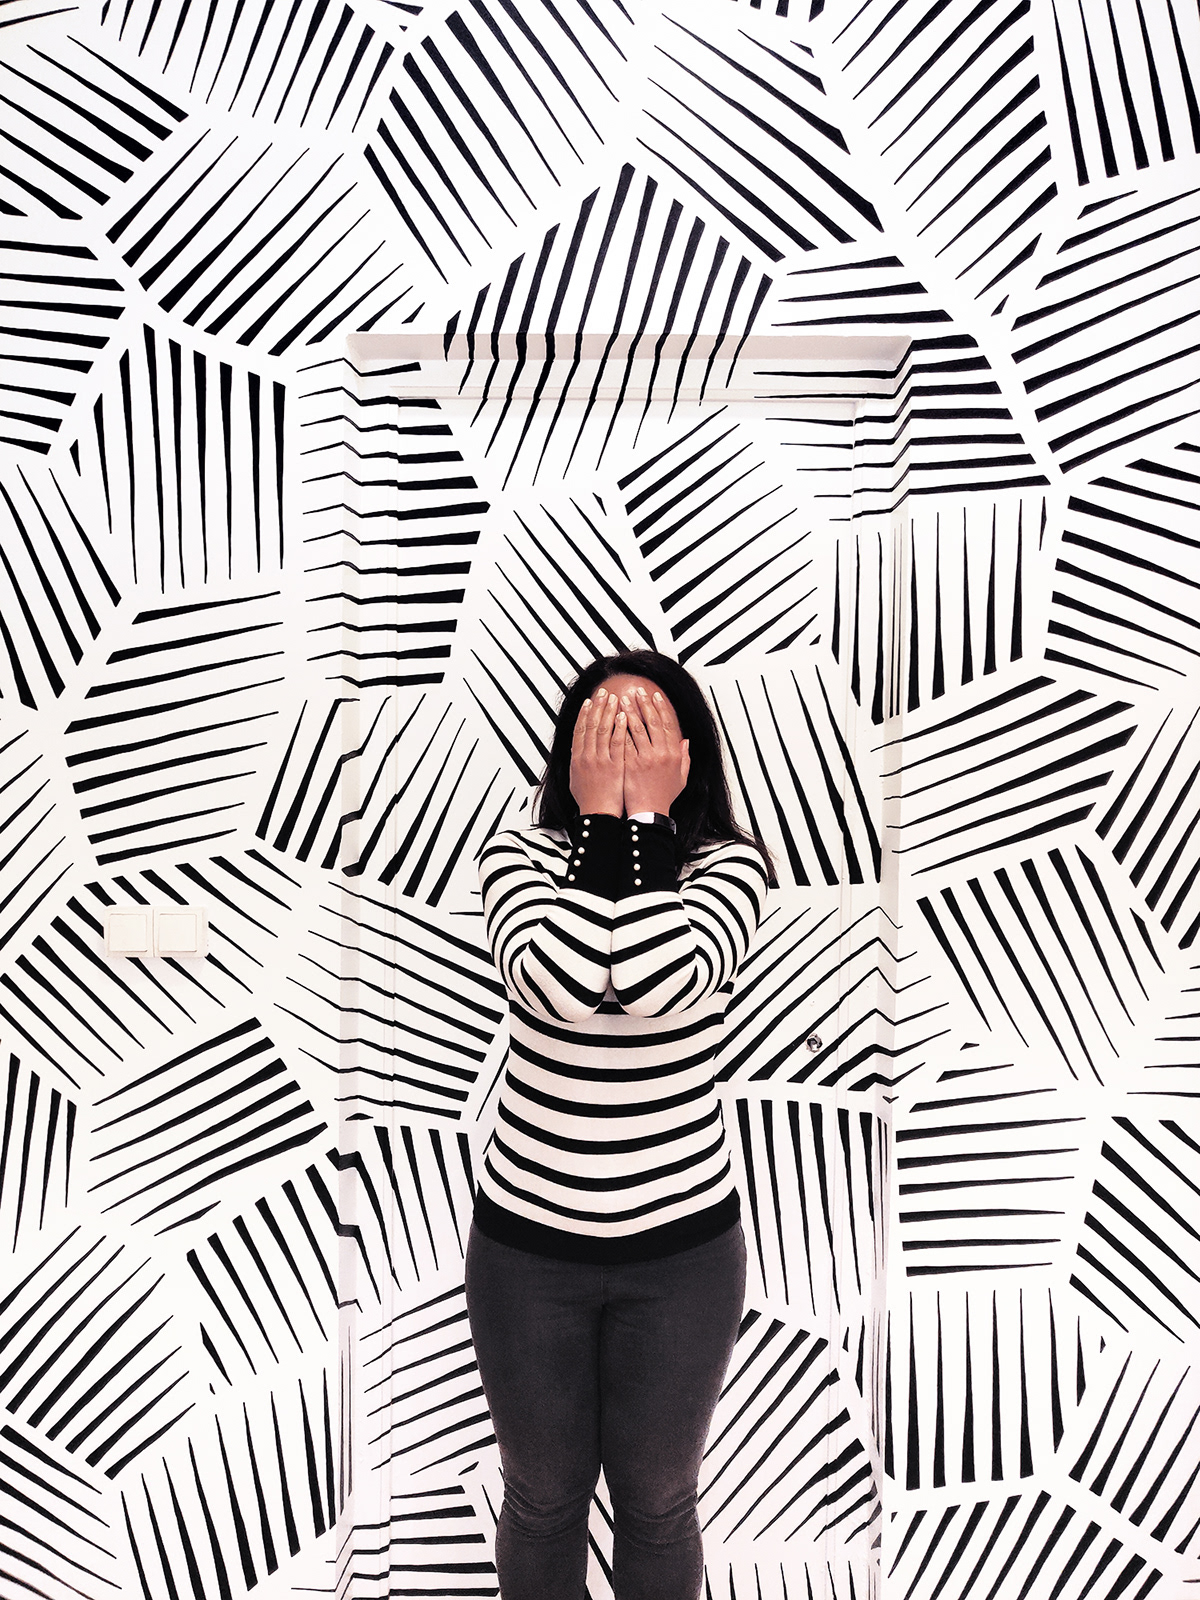 A woman camouflaging in front of an abstract, geometric black and white mural.